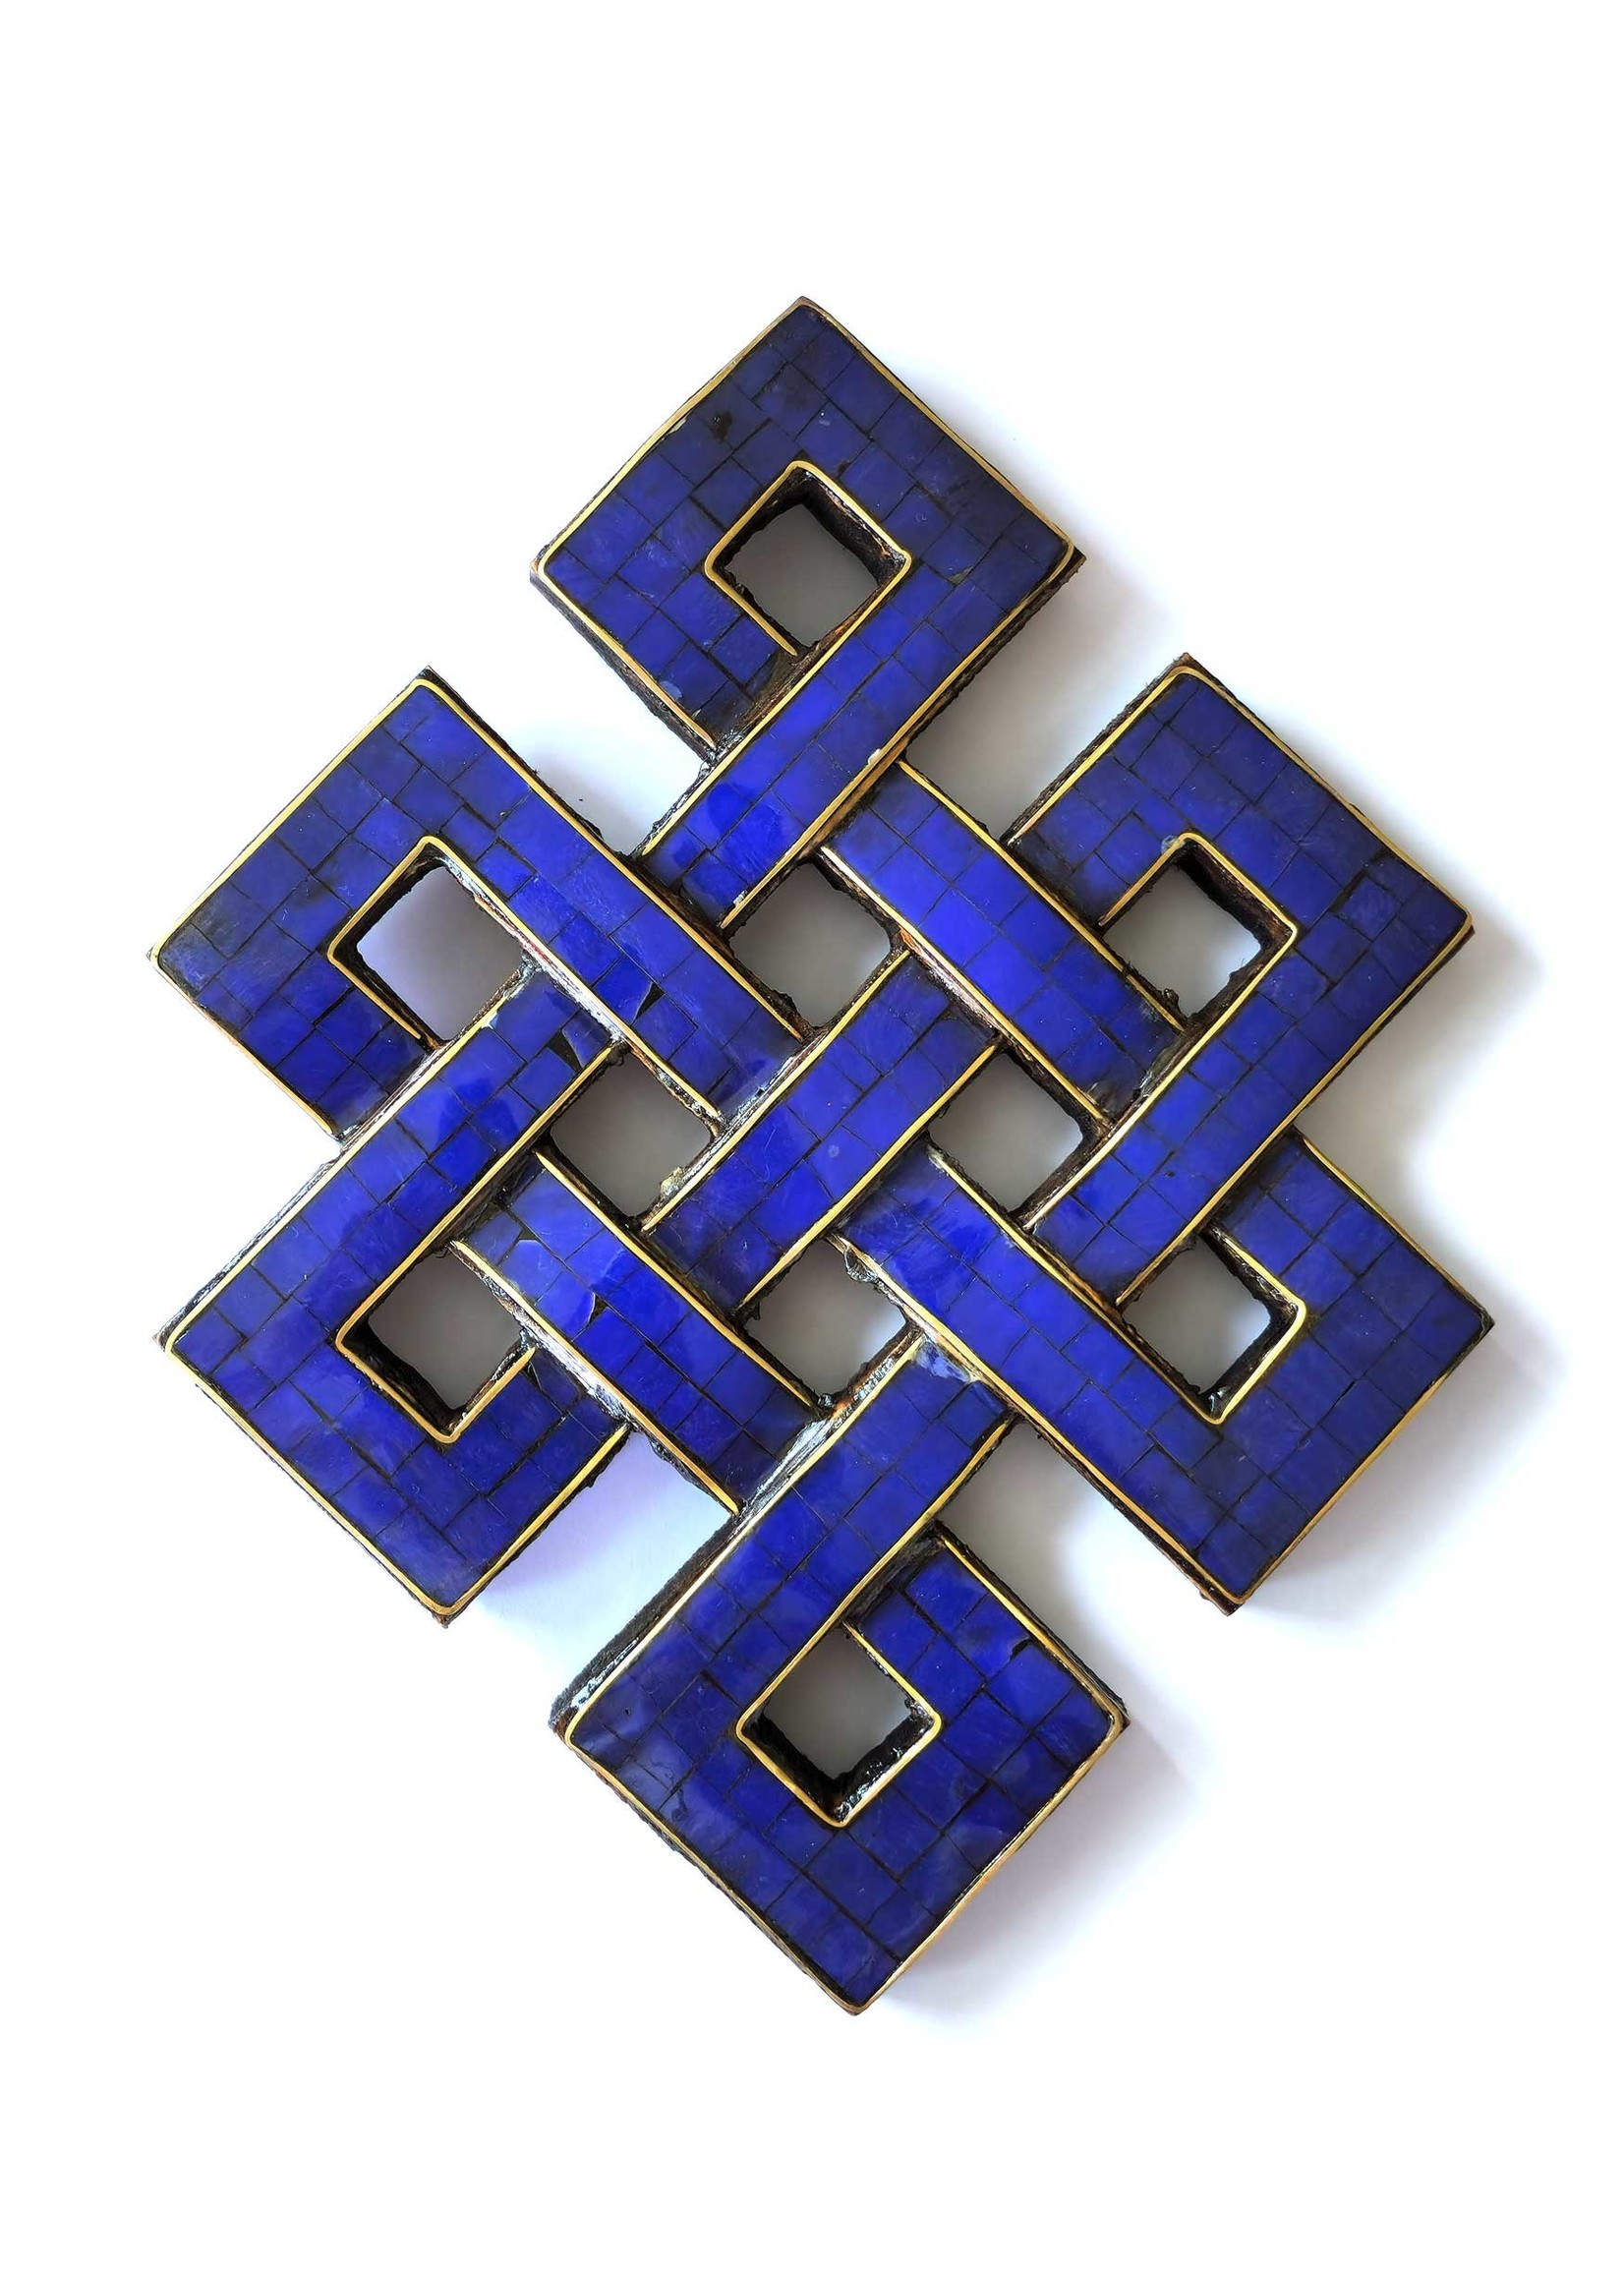 Tibetan Wall Hanging, Handcrafted Endless Knot, Wood & Lapis